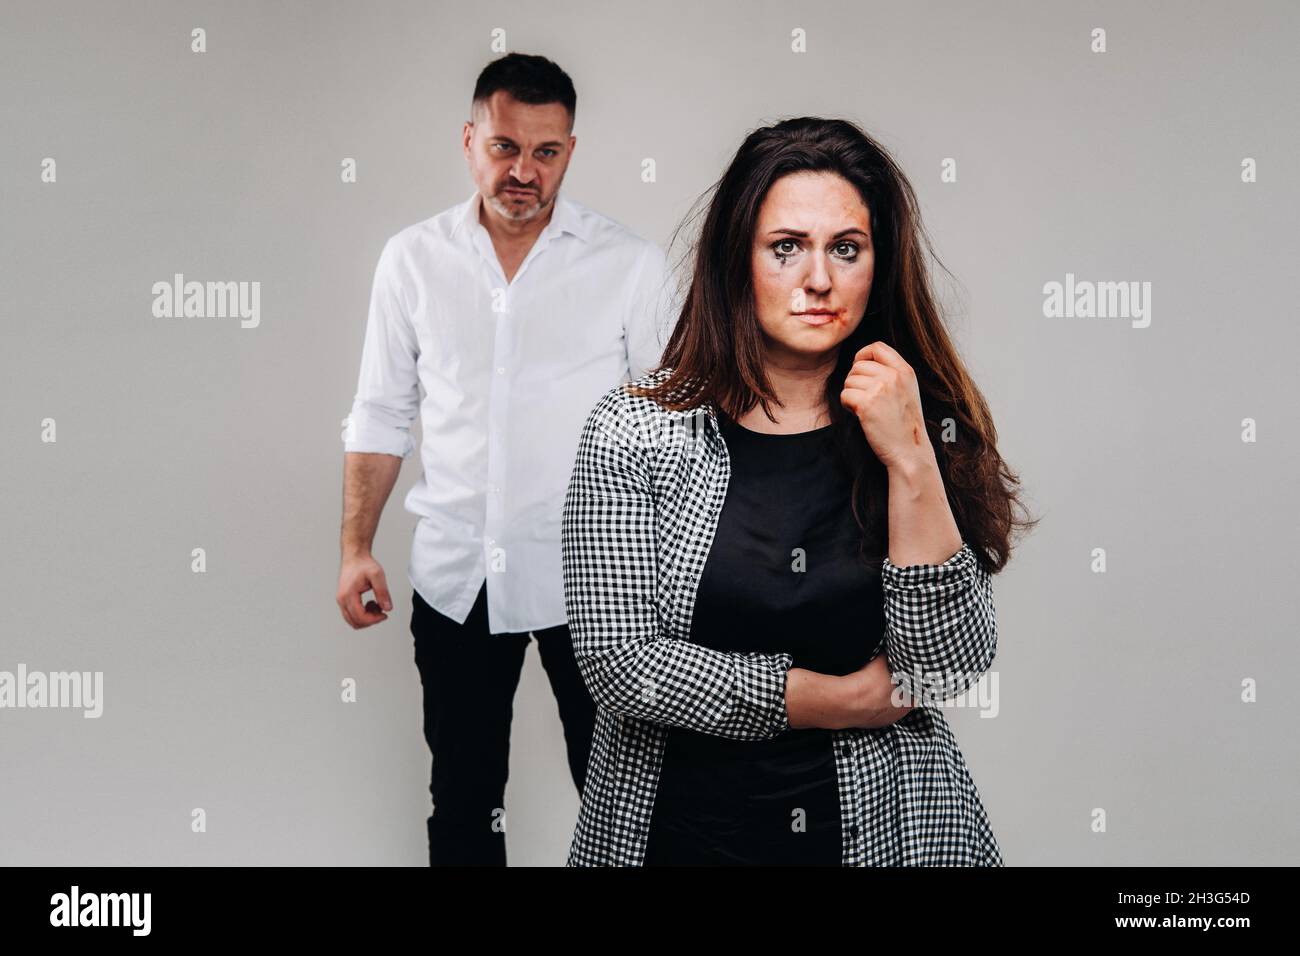 A woman beaten by her husband standing behind her and looking at her aggressively. Domestic violence. Stock Photo